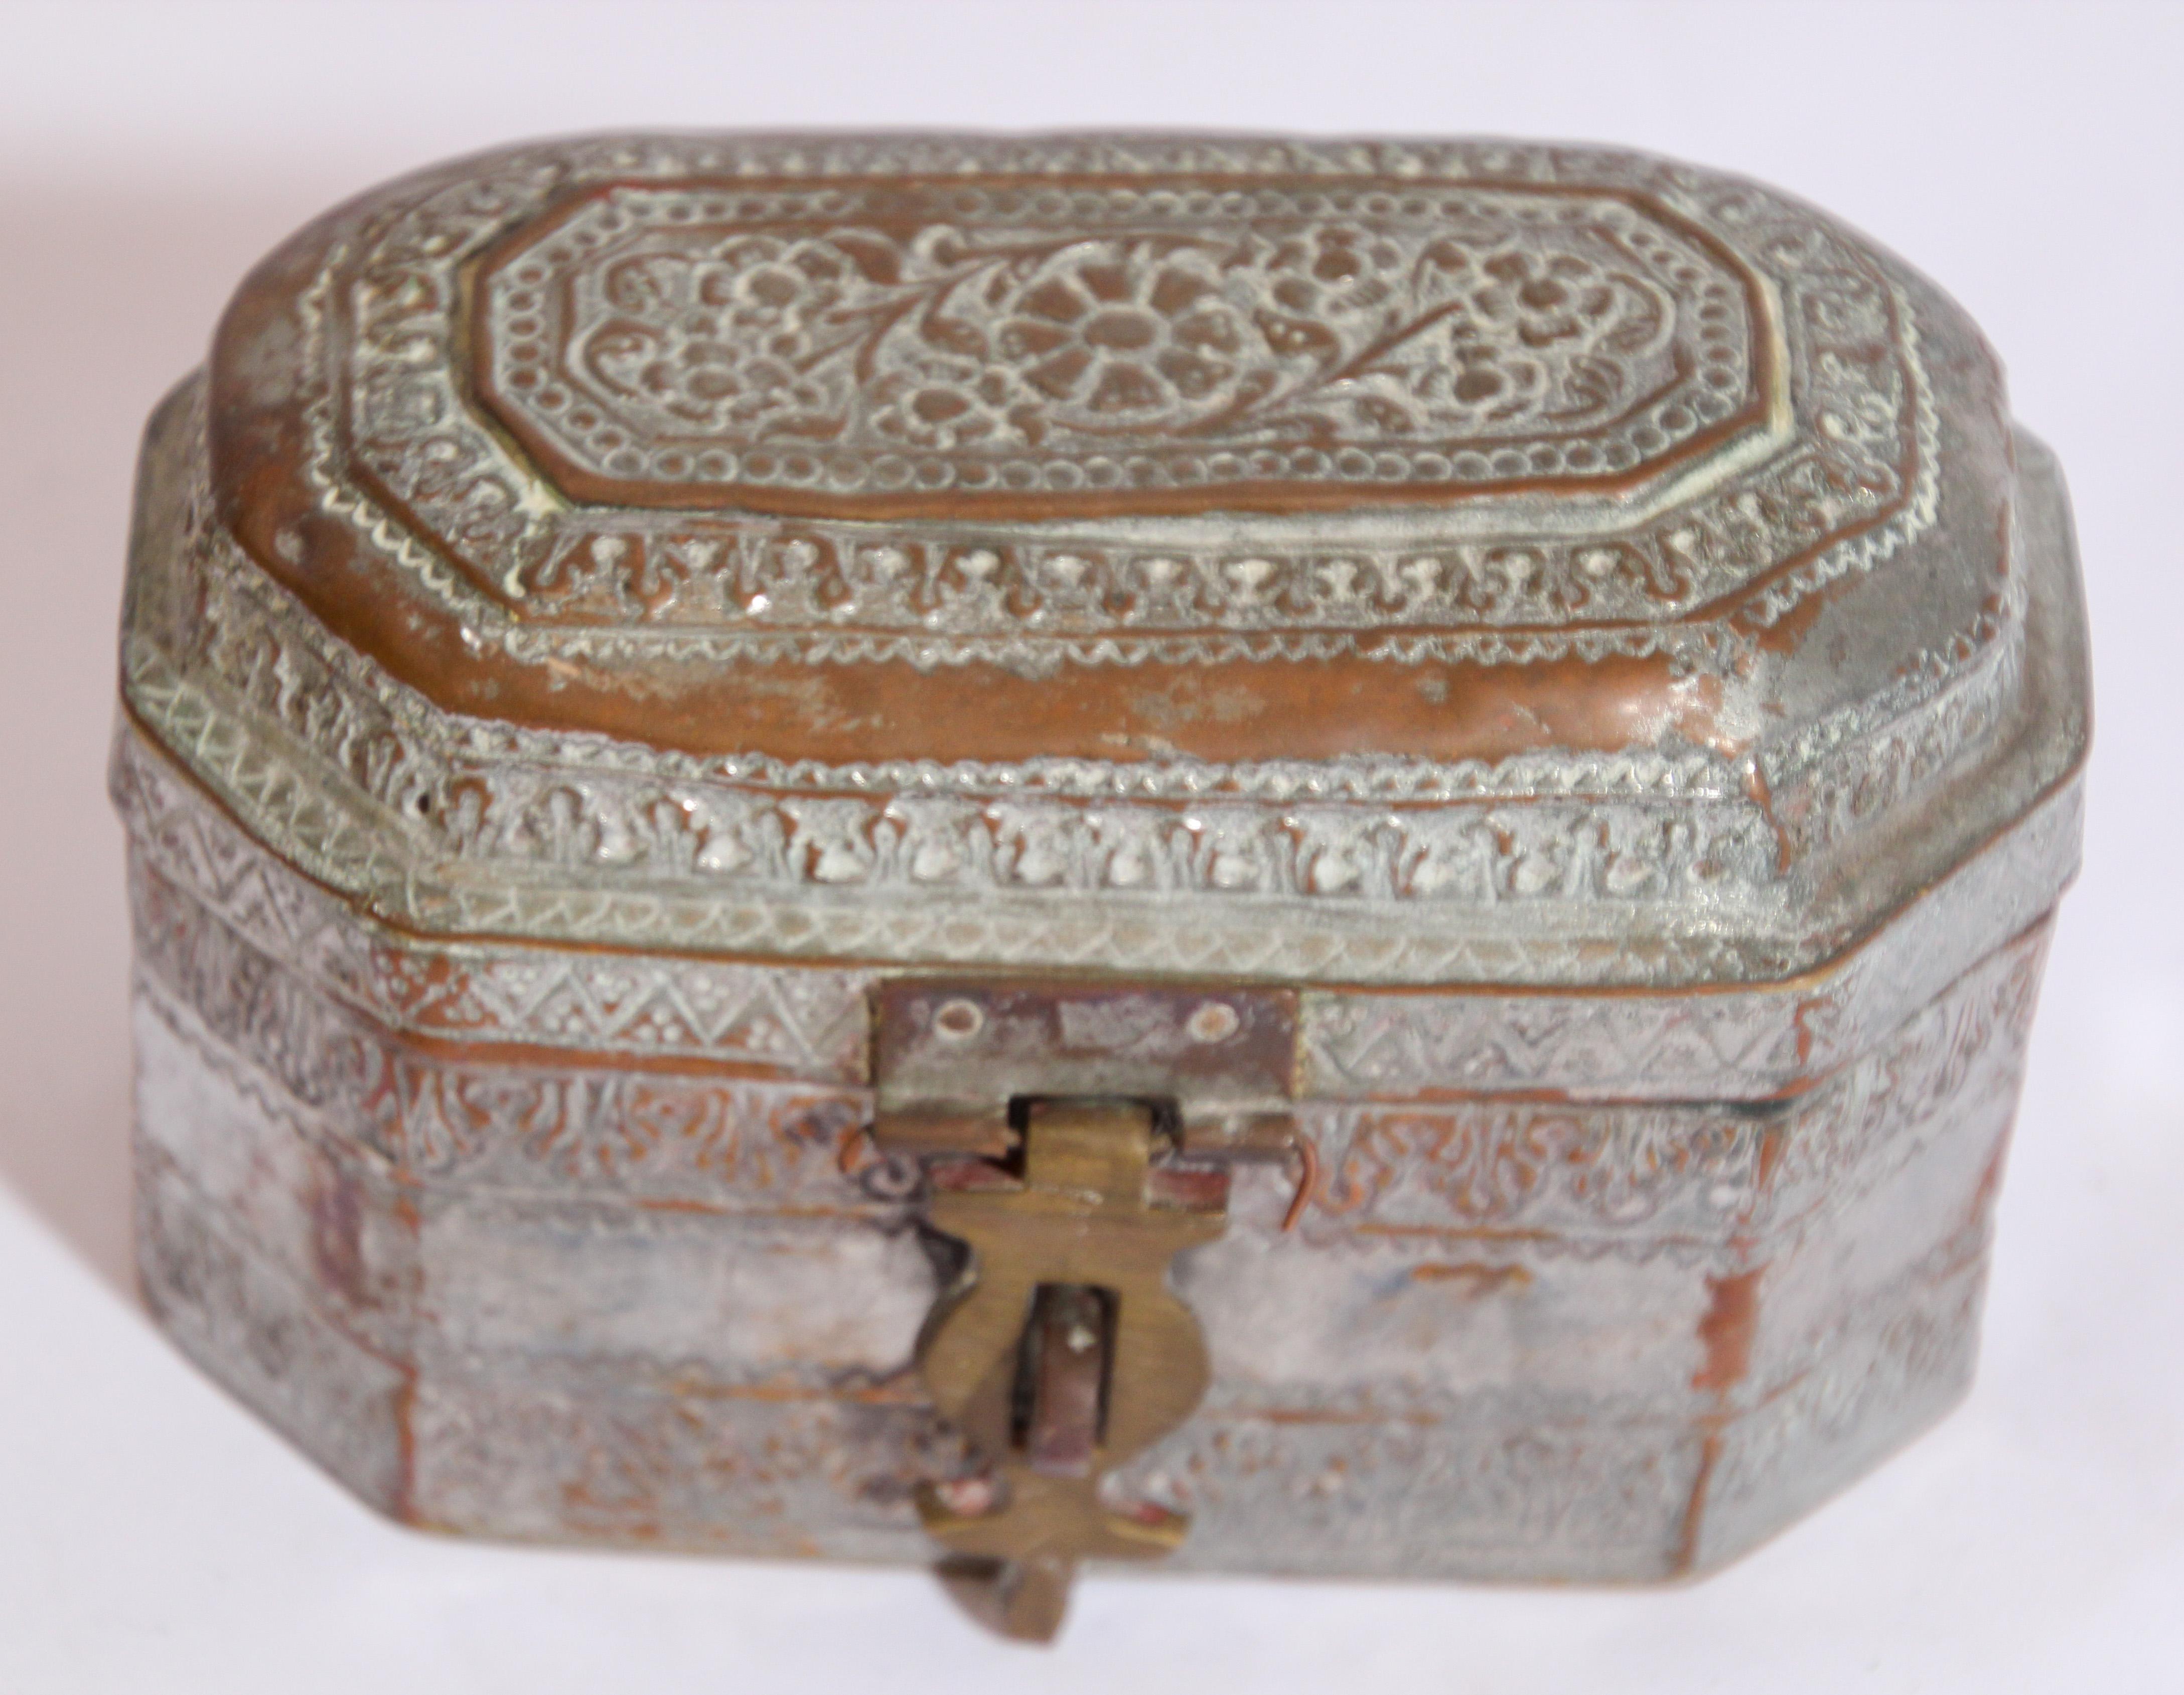 Beautiful handcrafted tinned copper decorative octagonal betel box with lid and brass latch.
The metal is delicately and intricately hand-hammered and repousse with floral and geometric designs.
This Vintage brass box is a Paan Daan used for the